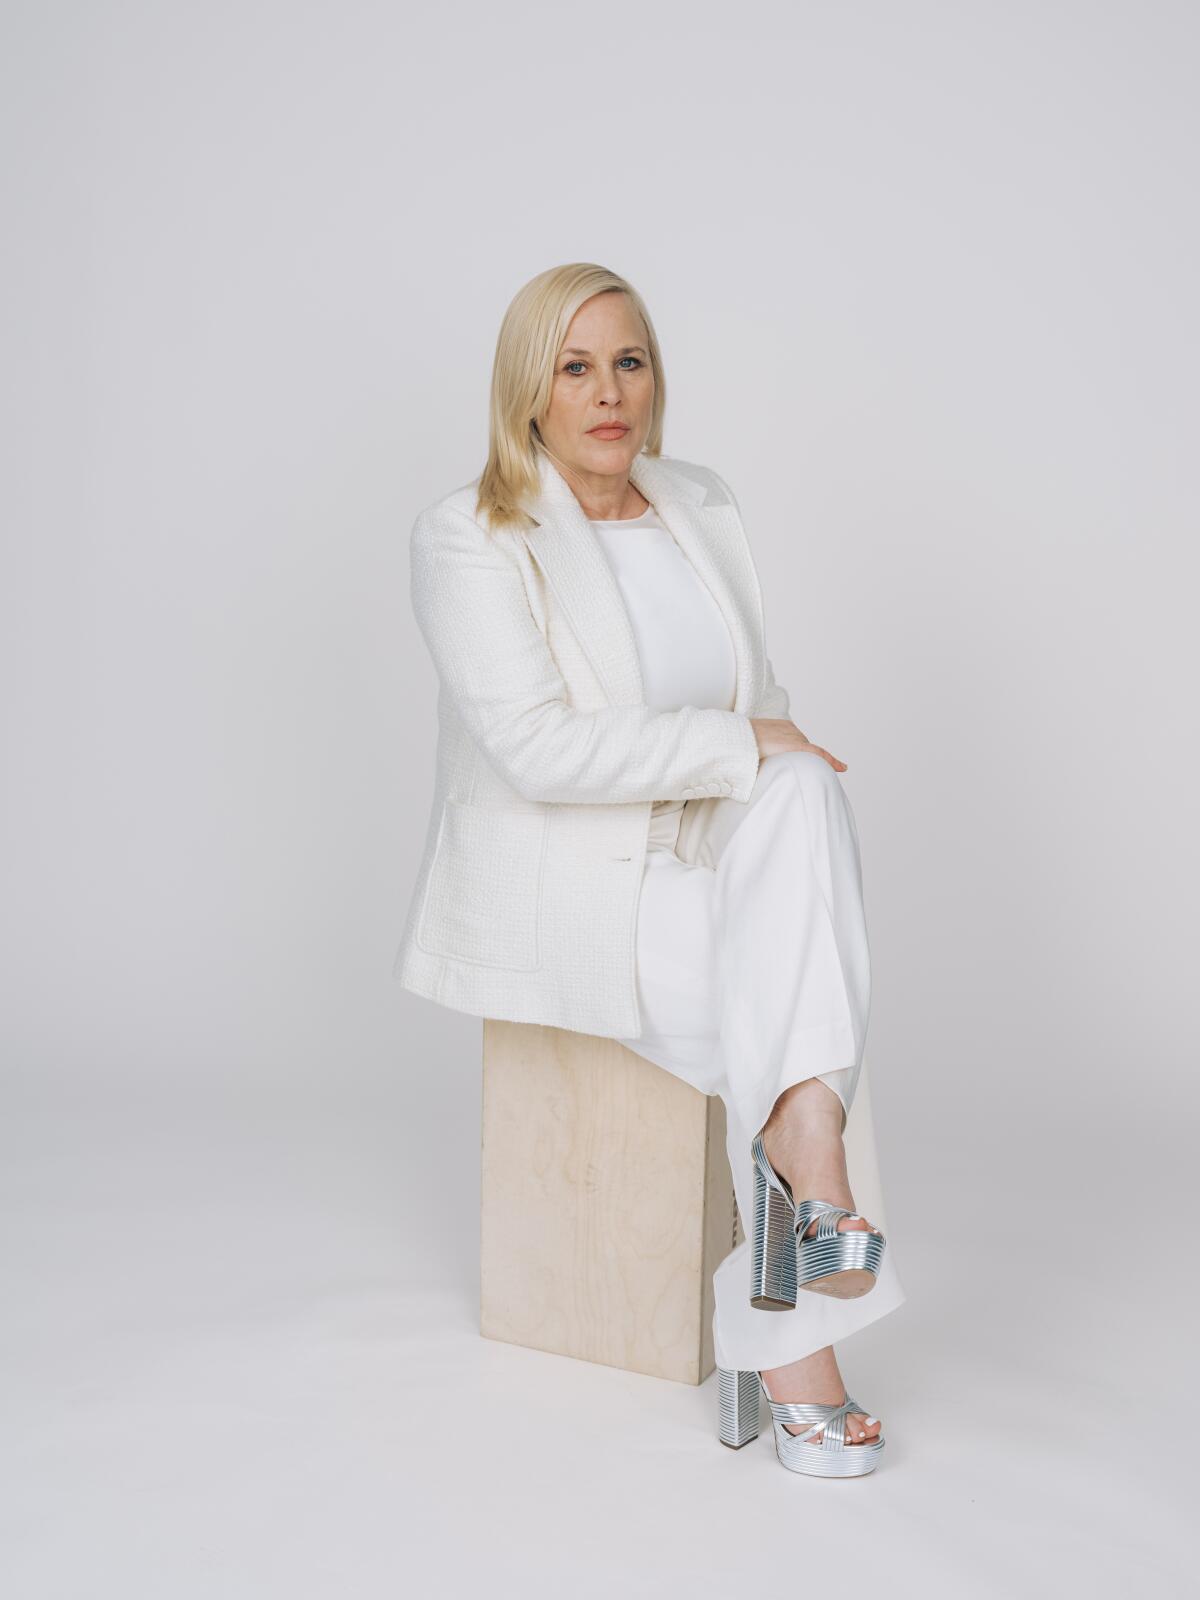 Patricia Arquette in a white suit and blouse and silver platform heels.